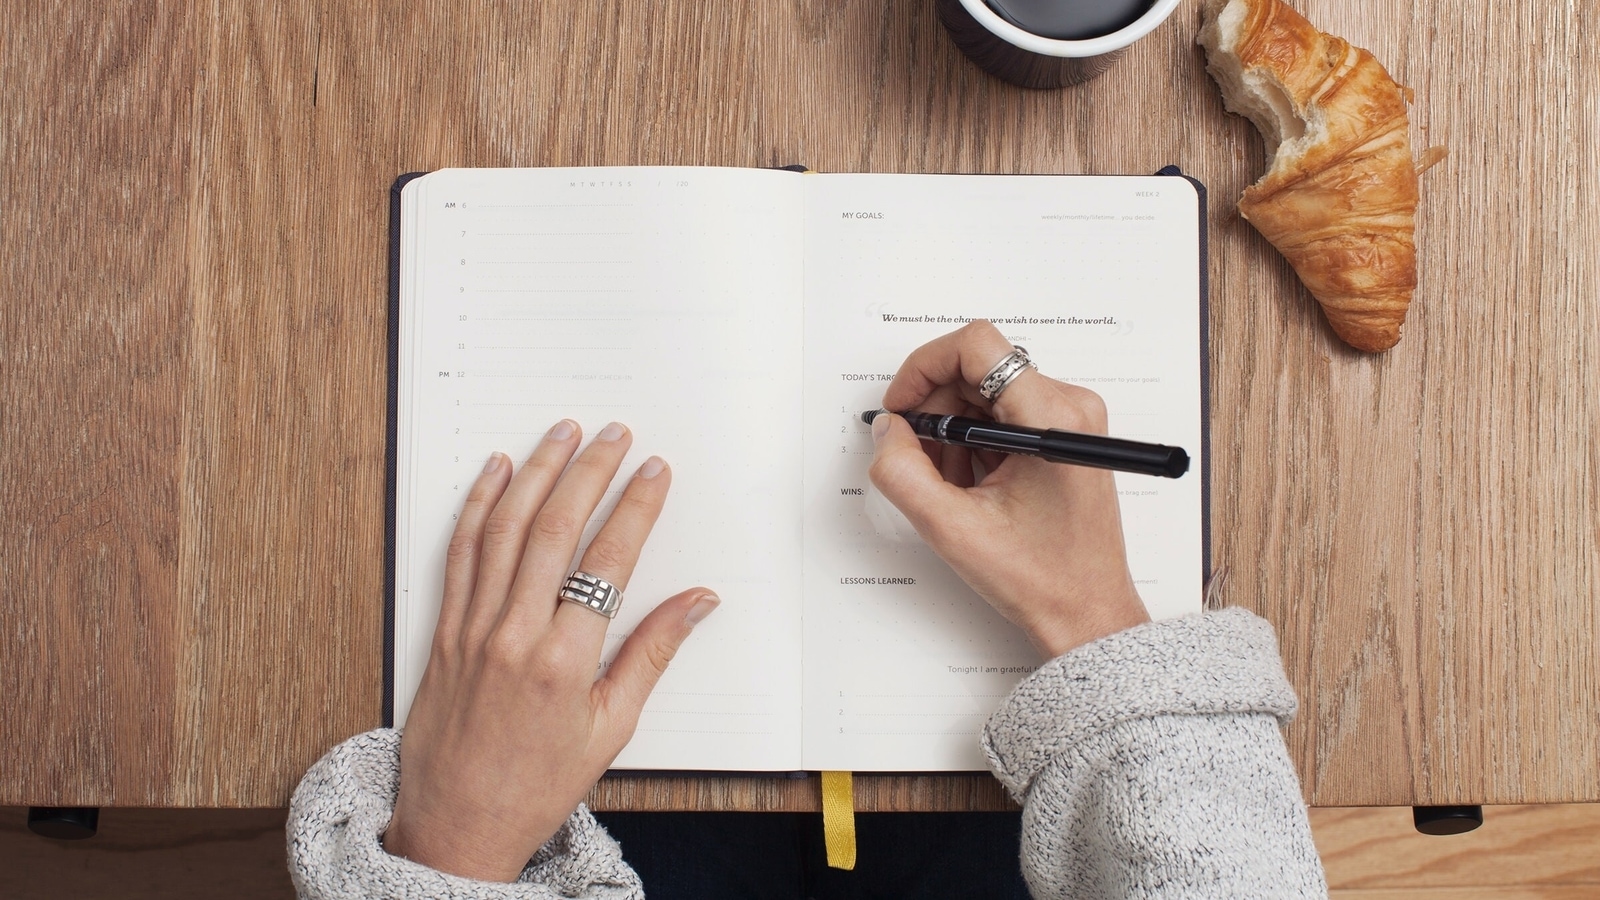 Benefits of Journaling: The Science and Philosophy Behind Keeping